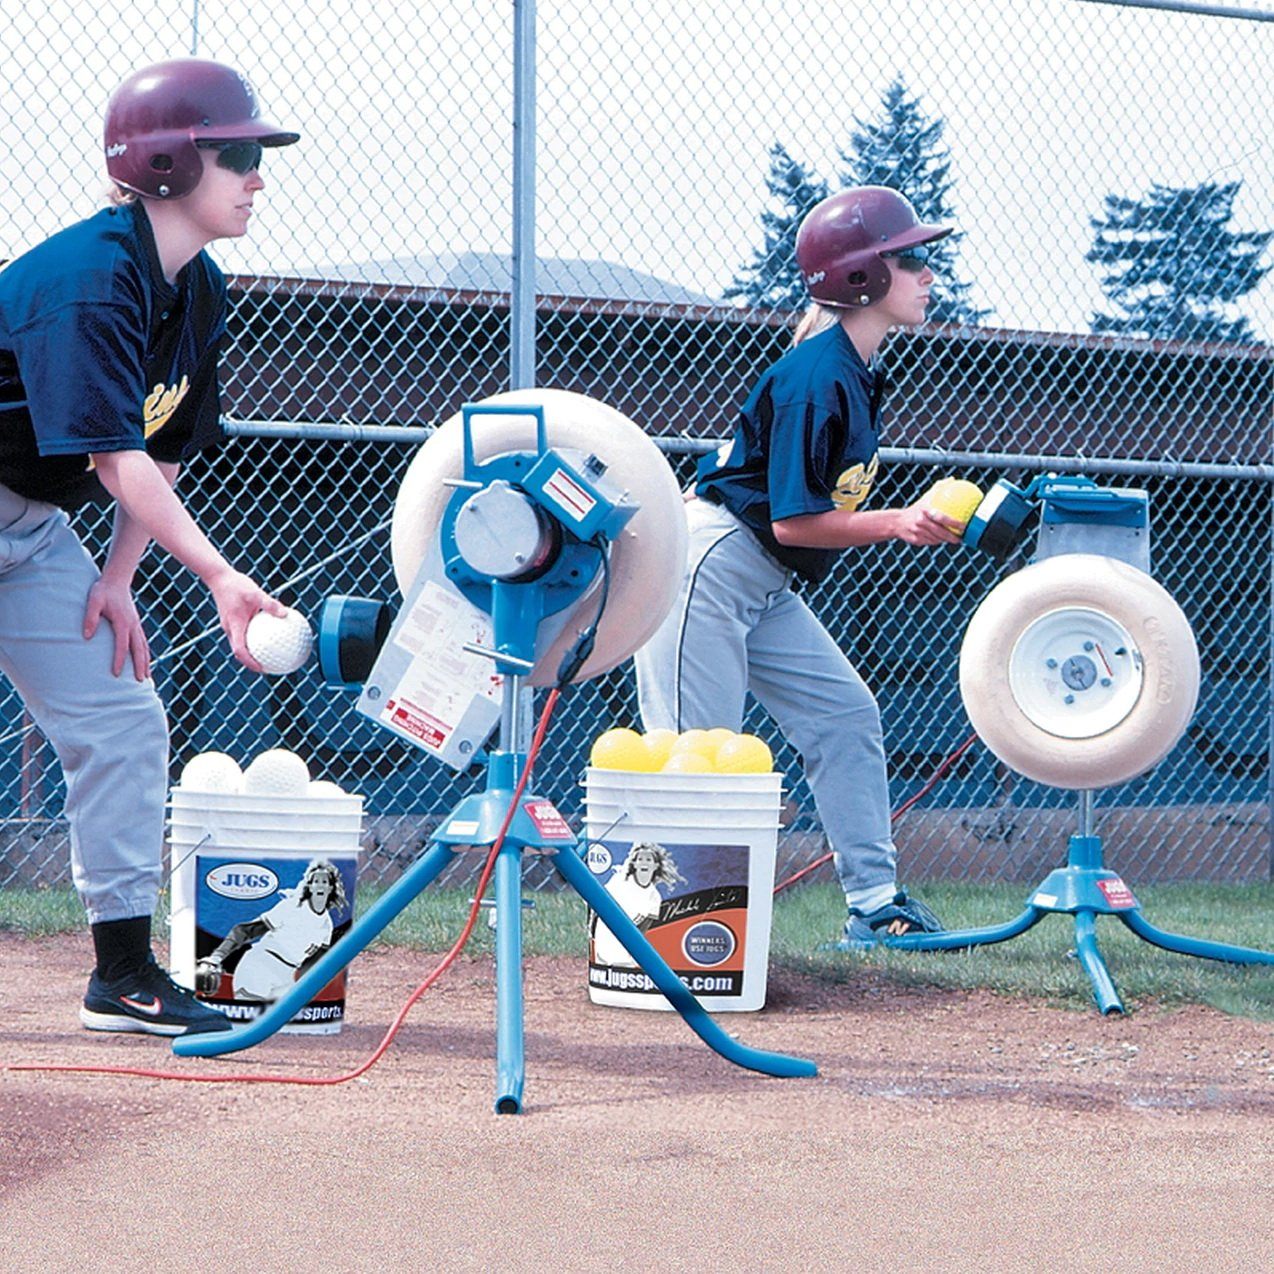 2 Jugs BP1 Pitching Machines for Softball used by Players for Practice